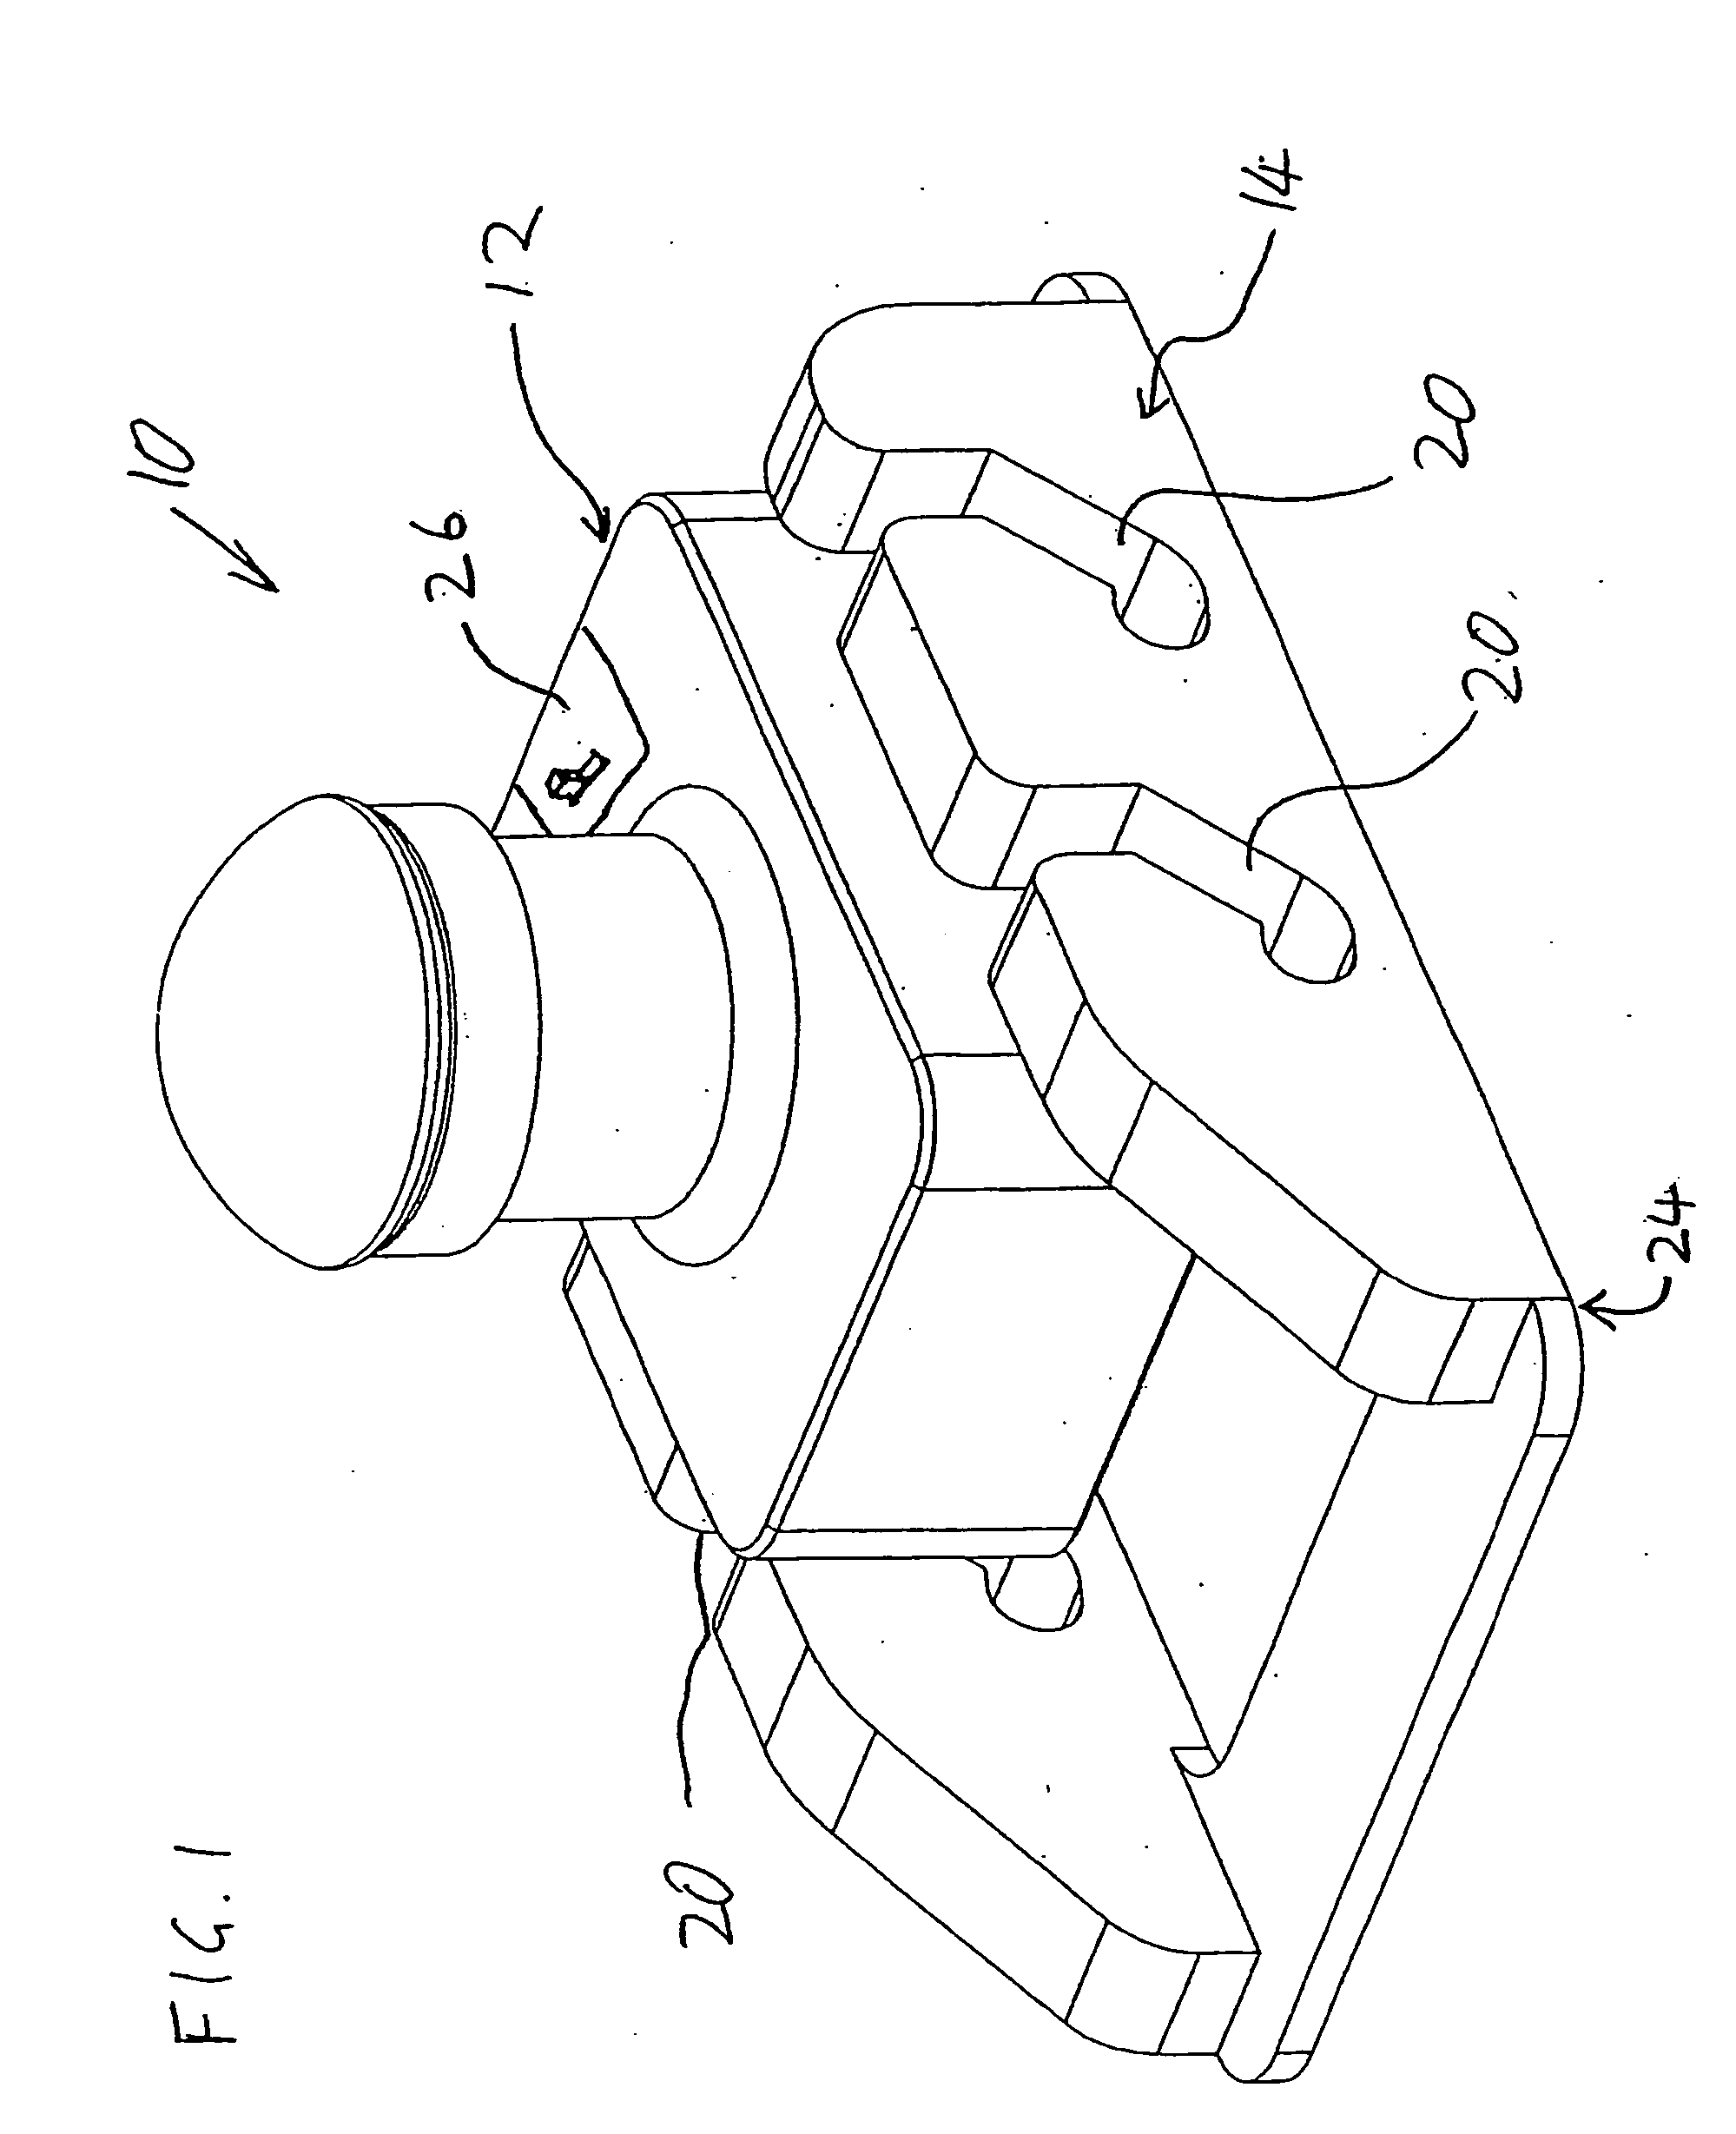 Devices and methods for transporting fluid across a biological barrier